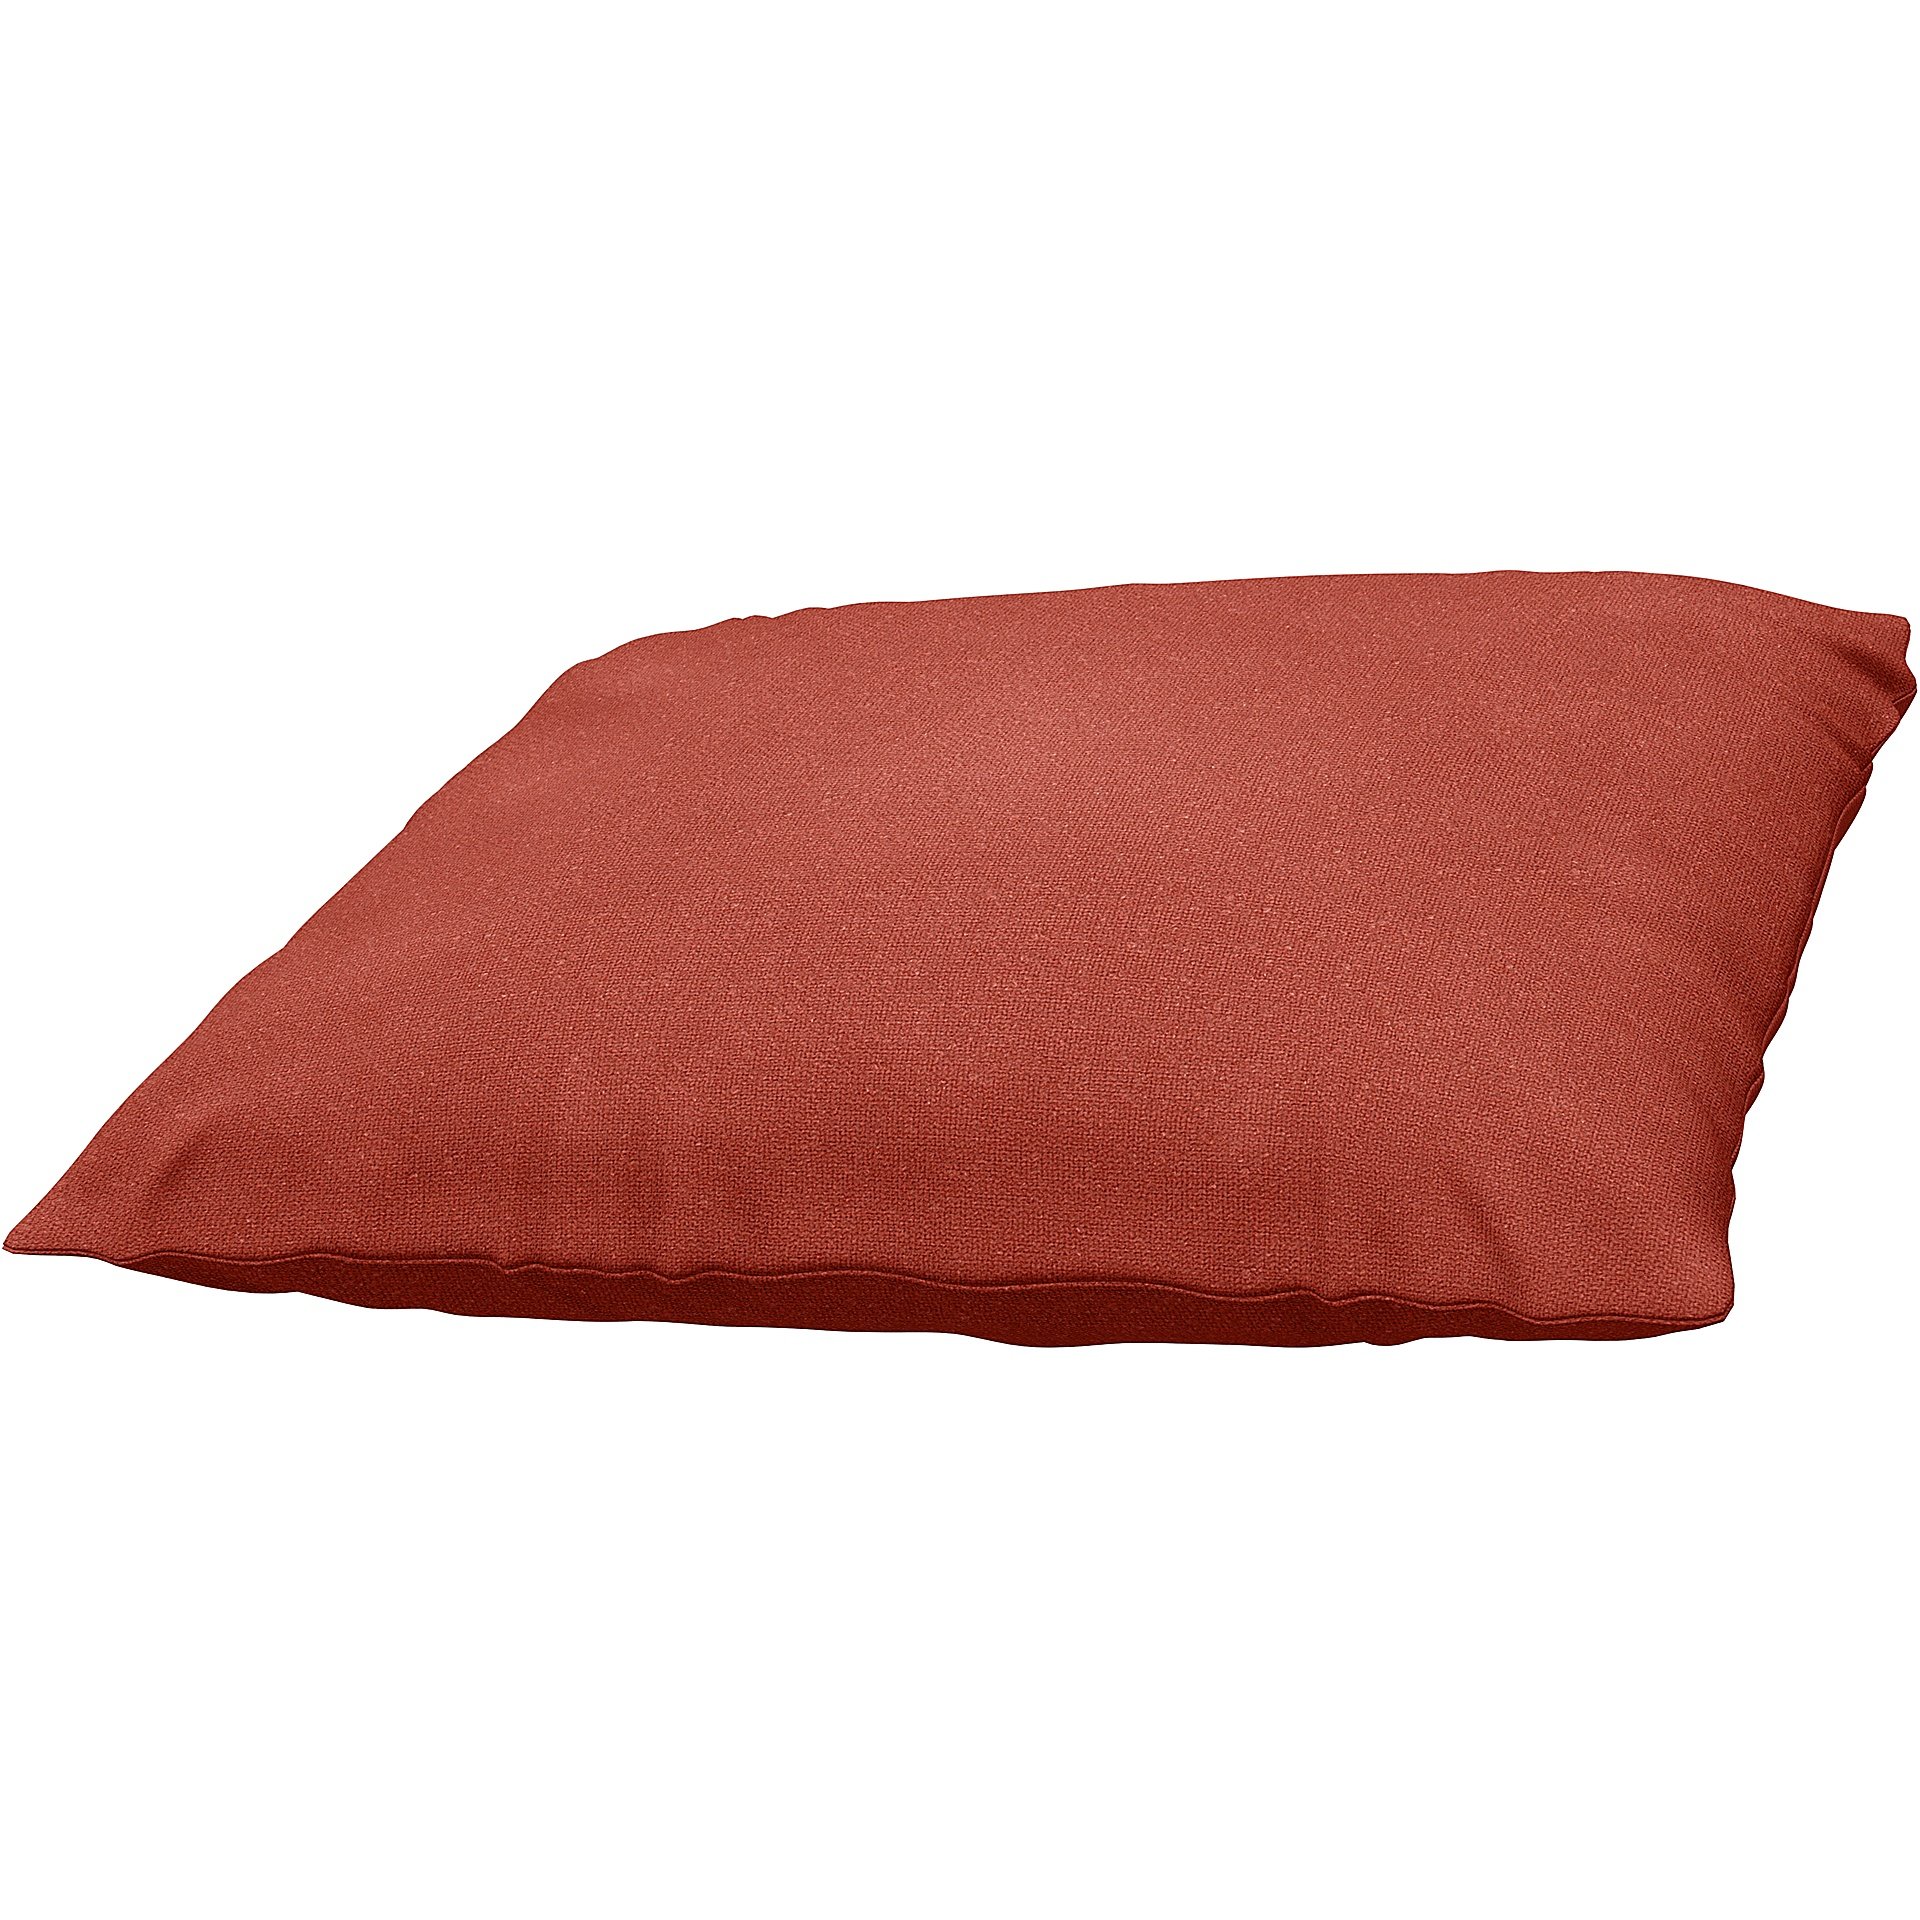 IKEA - Havsten Seat Cushion Cover, Coral Red, Outdoor - Bemz